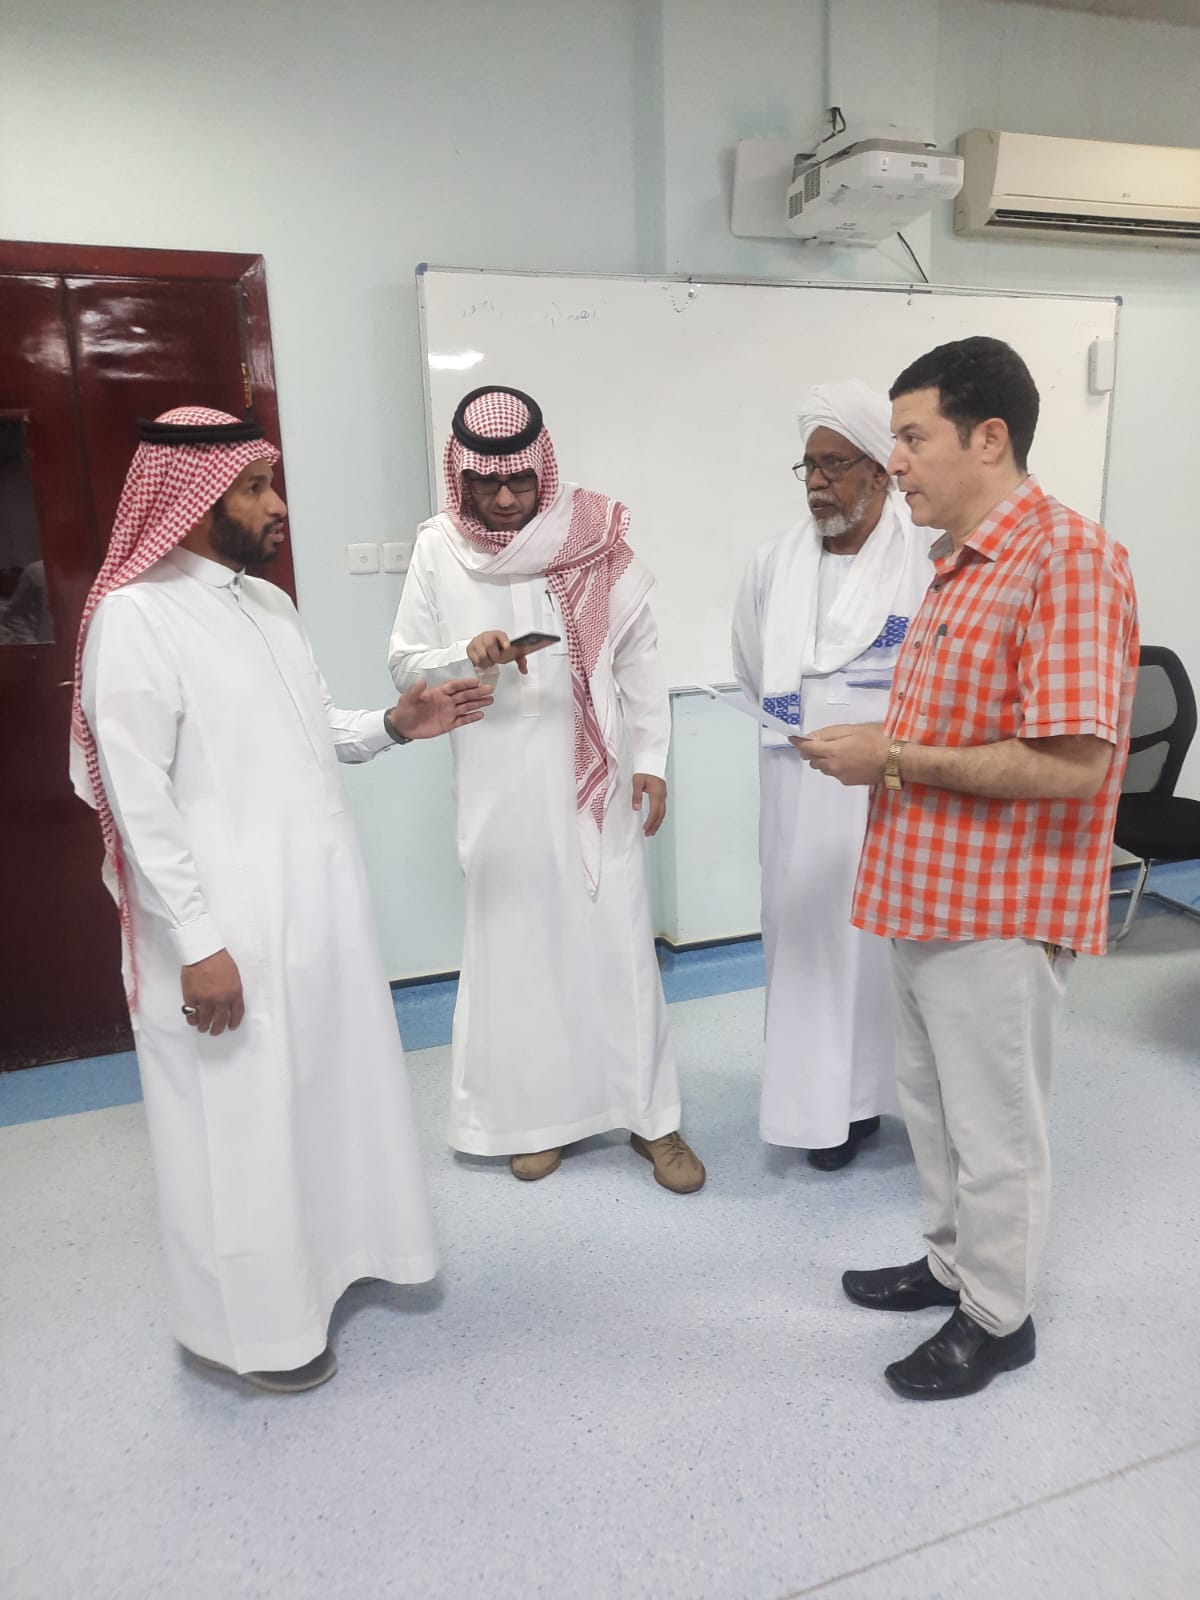 The University Vice President for Educational Affairs reviews the progress of final exams